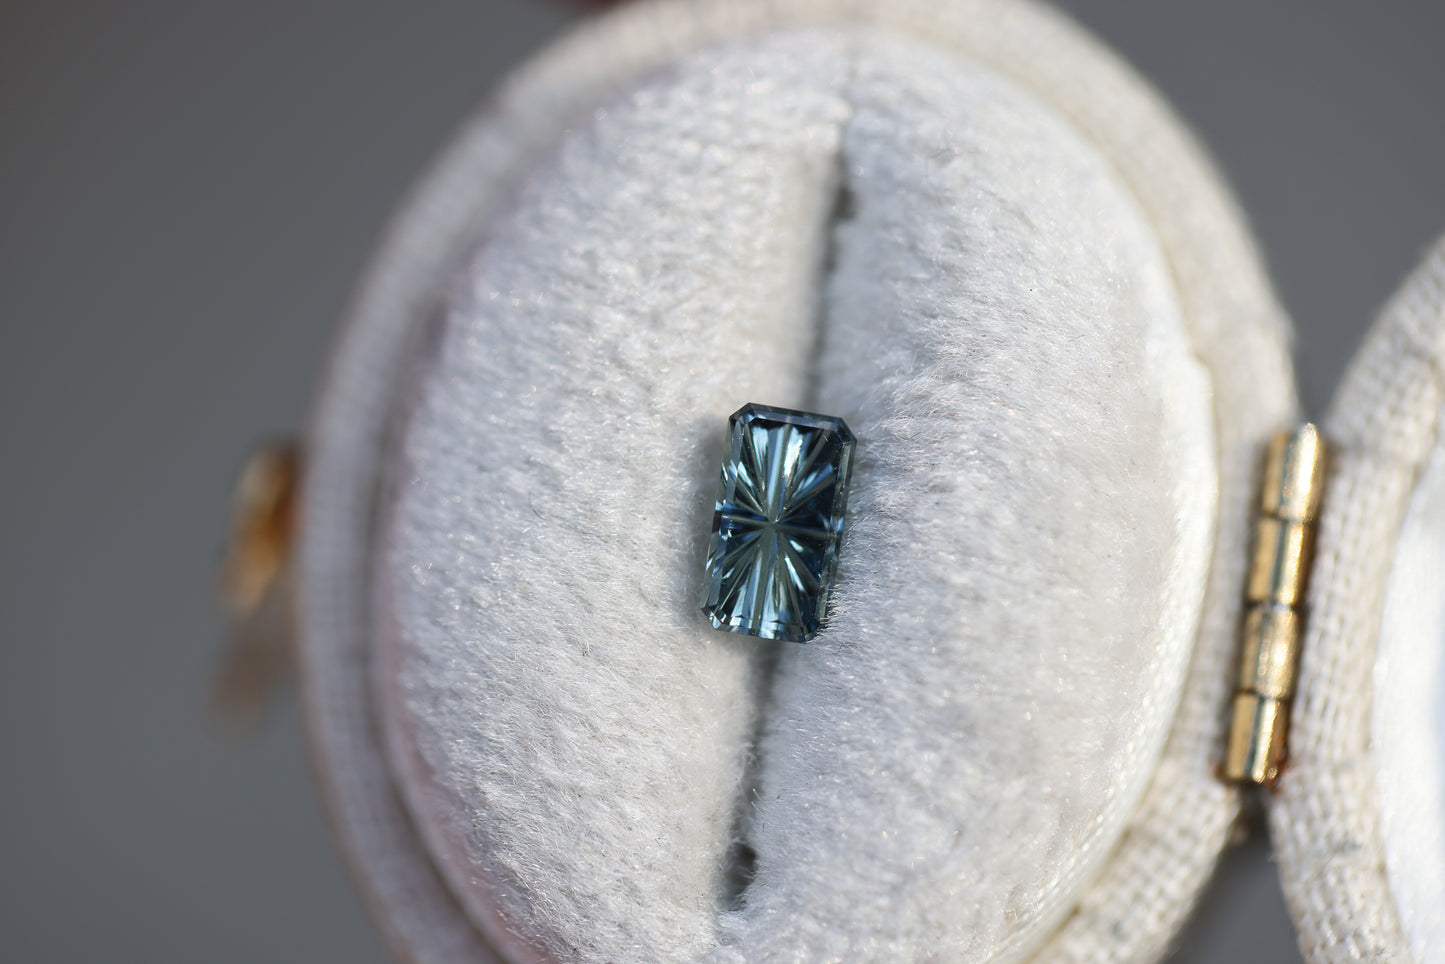 .52ct rectangle teal sapphire - Starbrite cut by John Dyer